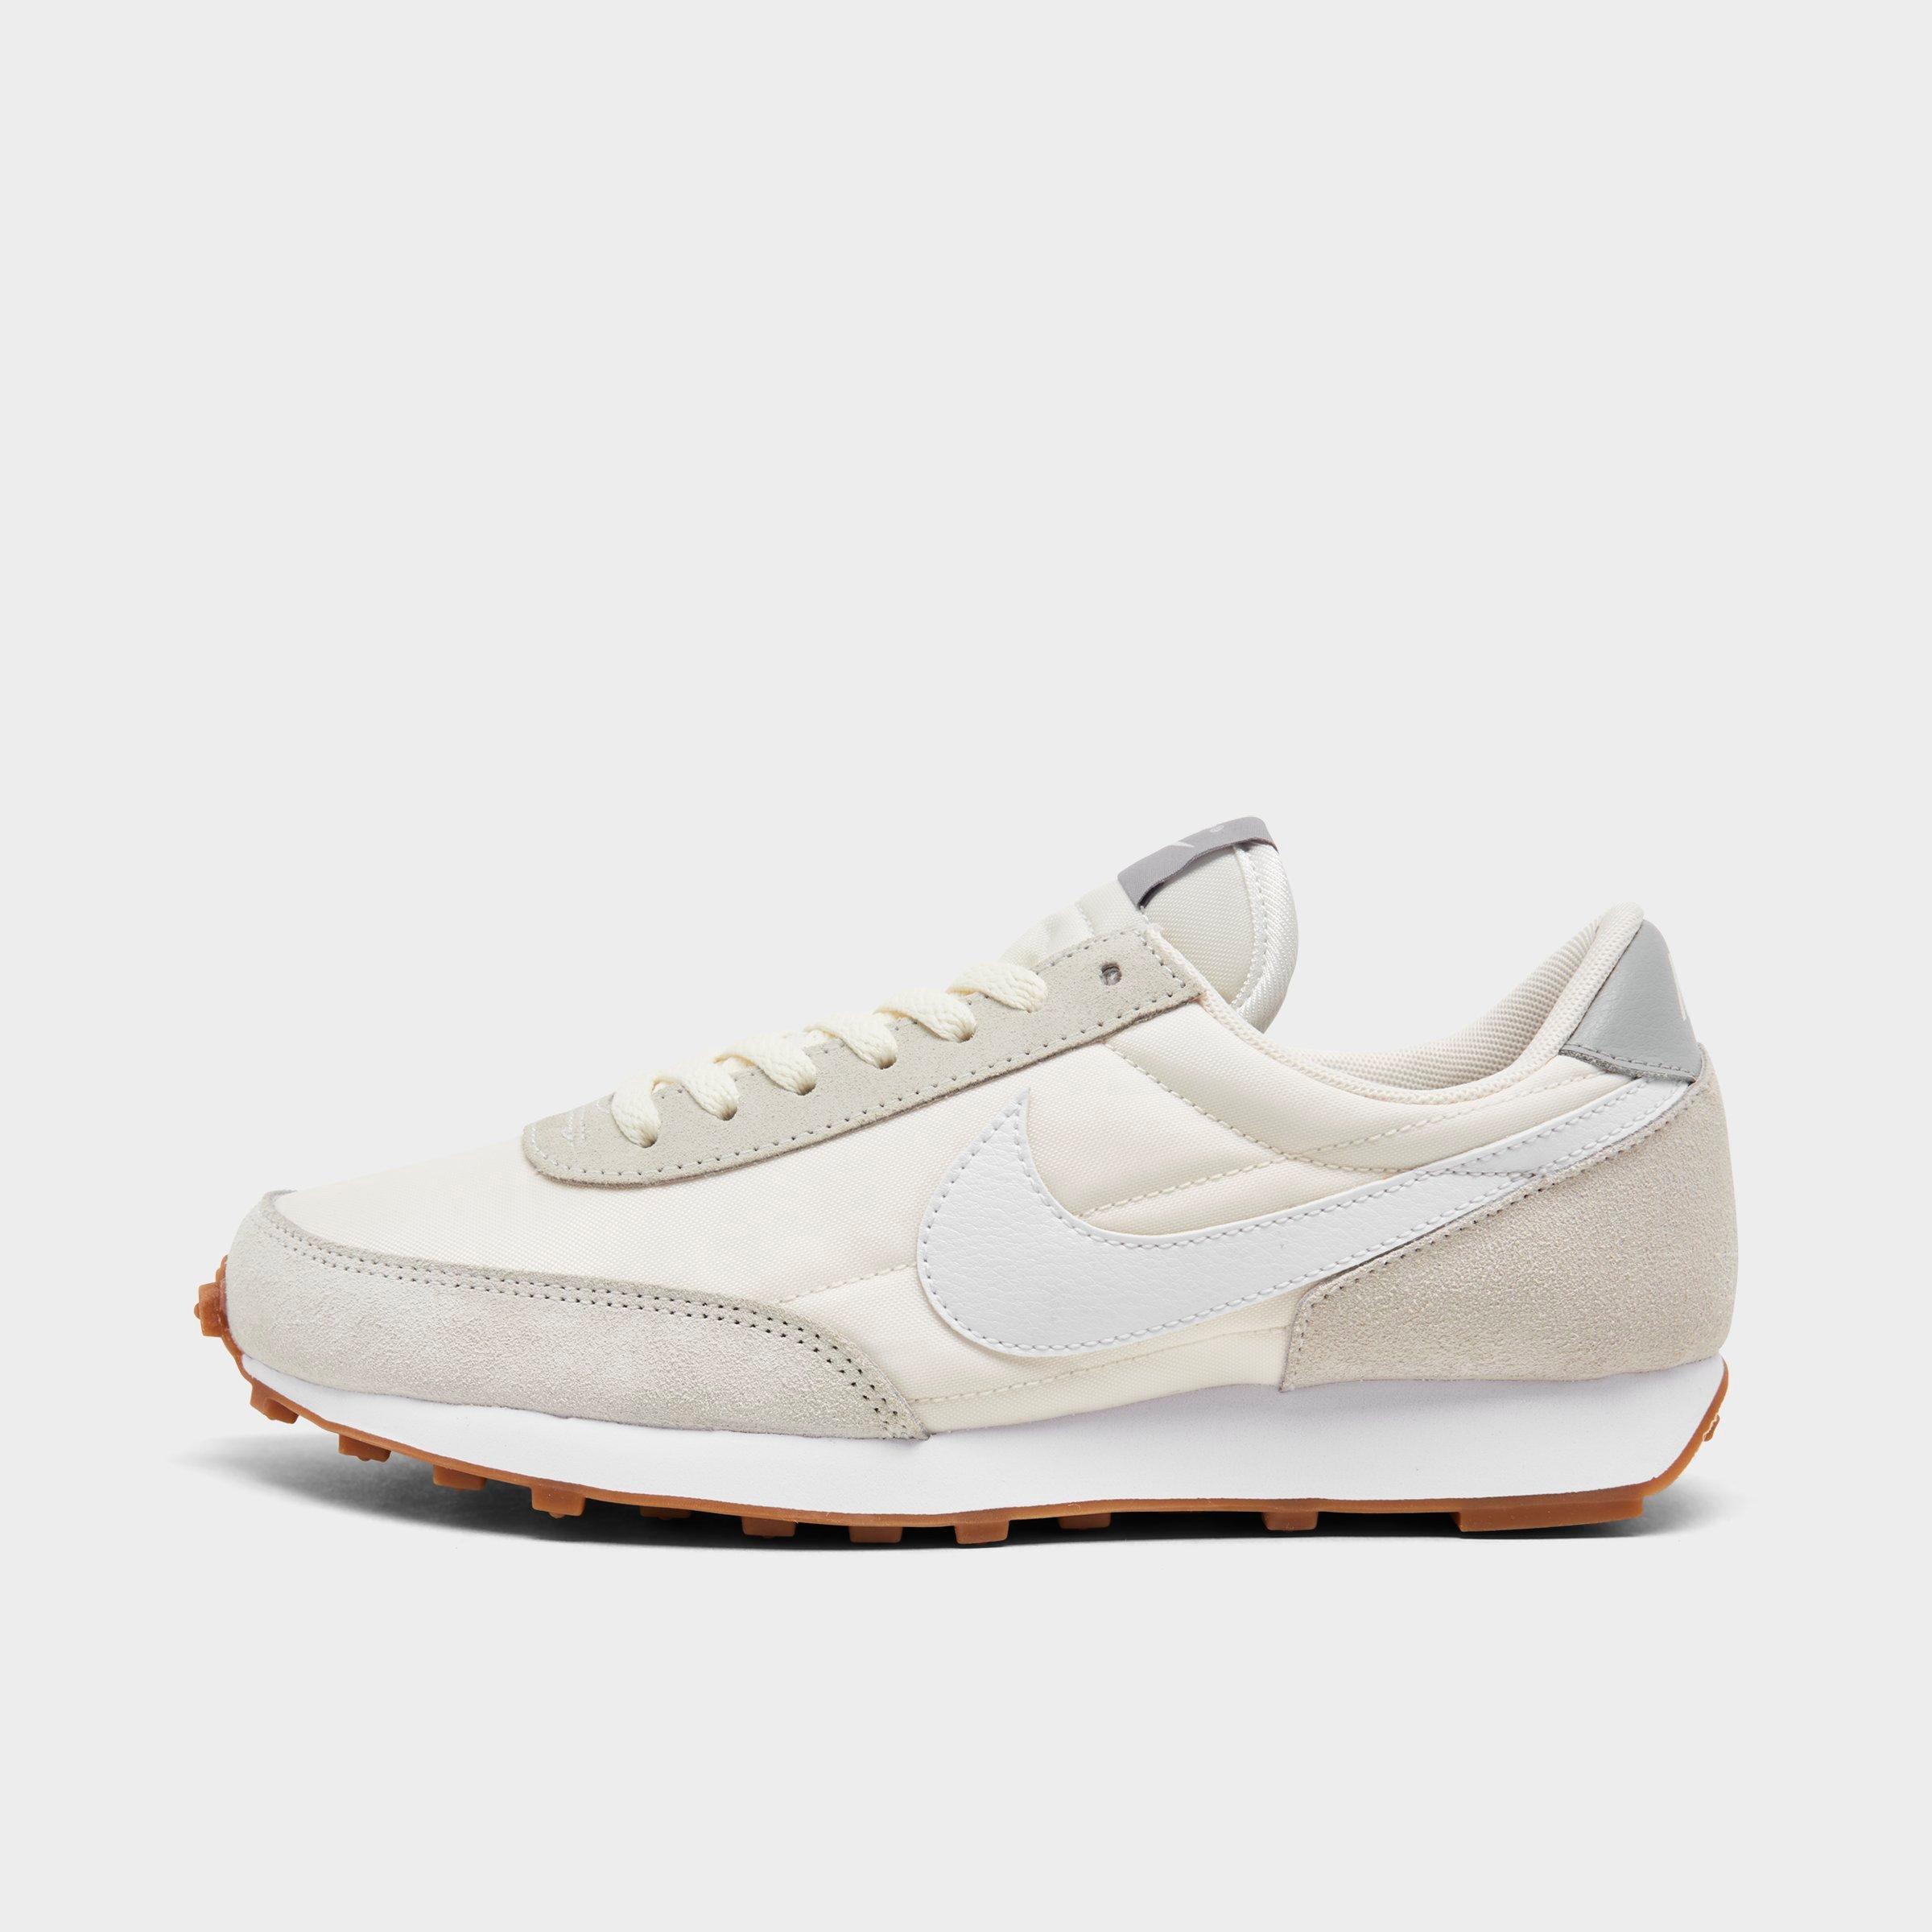 nike daybreak trainers in beige and yellow